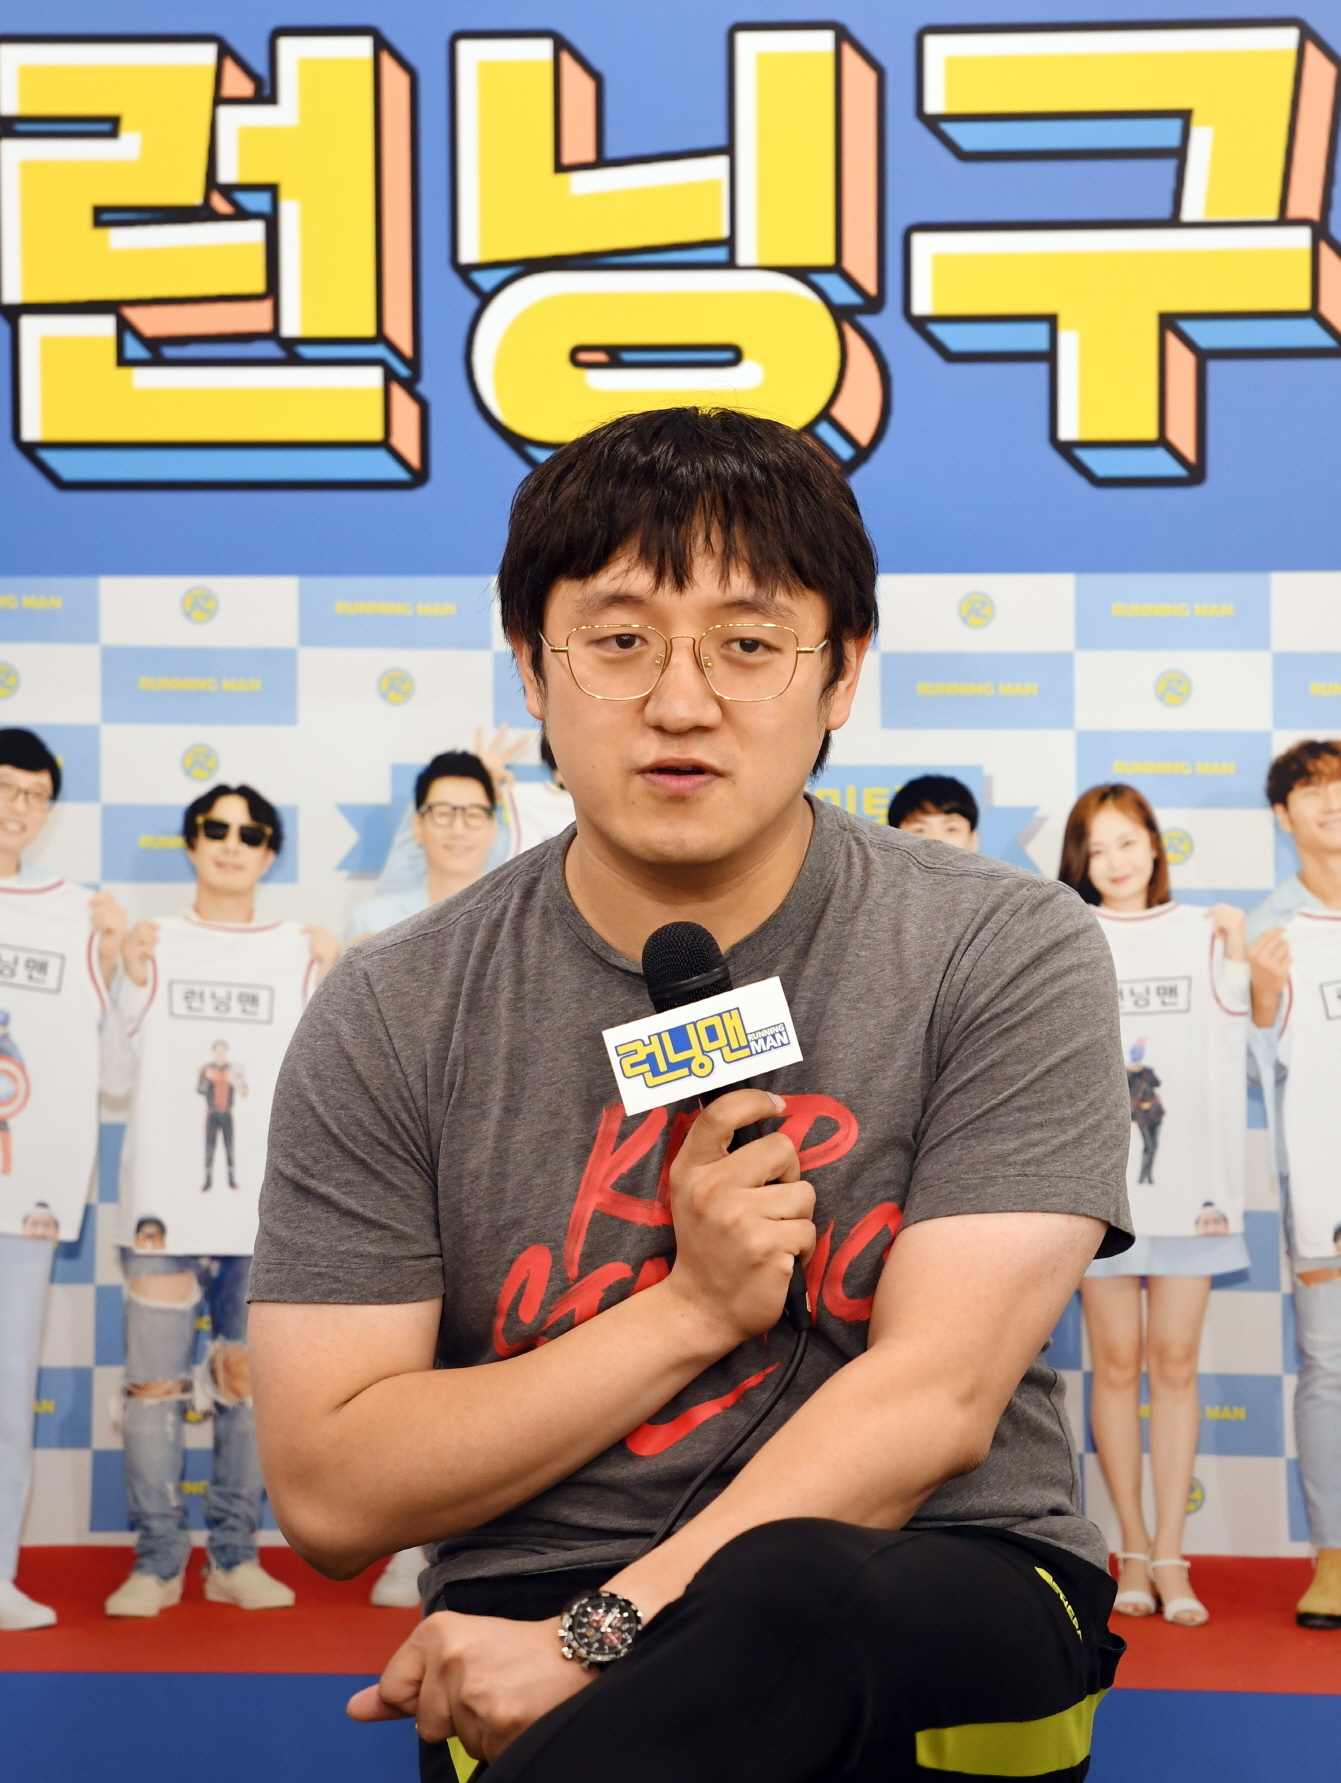 Seoul = = Running Man Jung Chul-min PD said he wanted to show newness through various plans such as fan meeting.Running Man, which was first broadcast on July 11, 2010, is an outdoor variety genre that combines Game and has been loved explosively in Asia beyond Korea.Beyond the key corner of chase and name tag, it has become a longevity entertainment with various game and character shows.Running Man members opened their first domestic fan meeting Running Zone Project in August and celebrated the Nine-year anniversary with splendor.Next is a one-word answer with PD Jung Chul-min.- Im sorry, Im sorry to hear about the...-nine-year anniversary The reason why the special should be fan meeting-Why nine-year anniversary.- Among the SBS programs, there is no program beyond the Nine-year anniversary, so Running Man seems to be special.